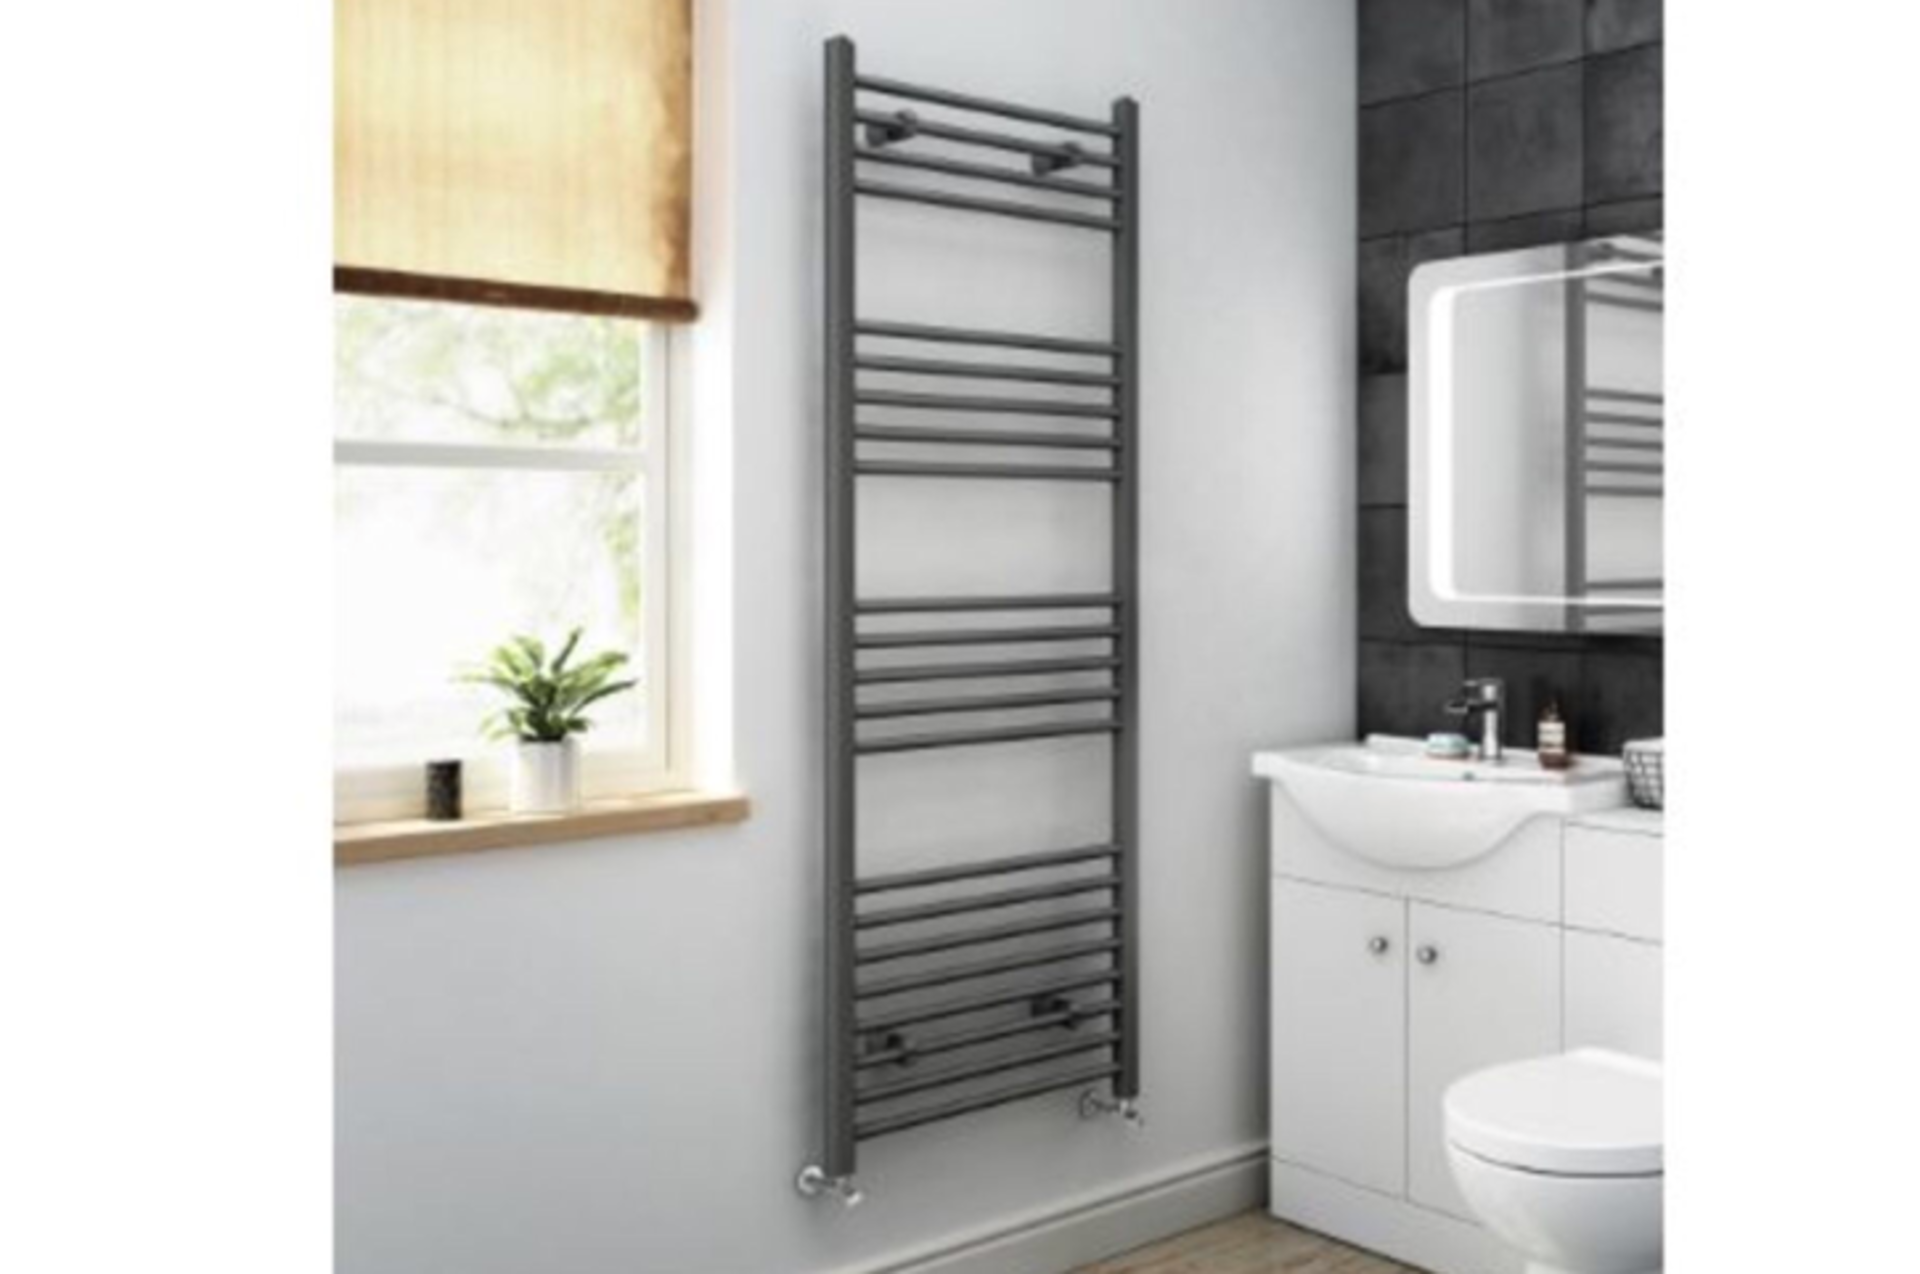 BRAND NEW BOXED 1600x600MM ANTHRACITE TOWEL RADIATOR. RRP £249